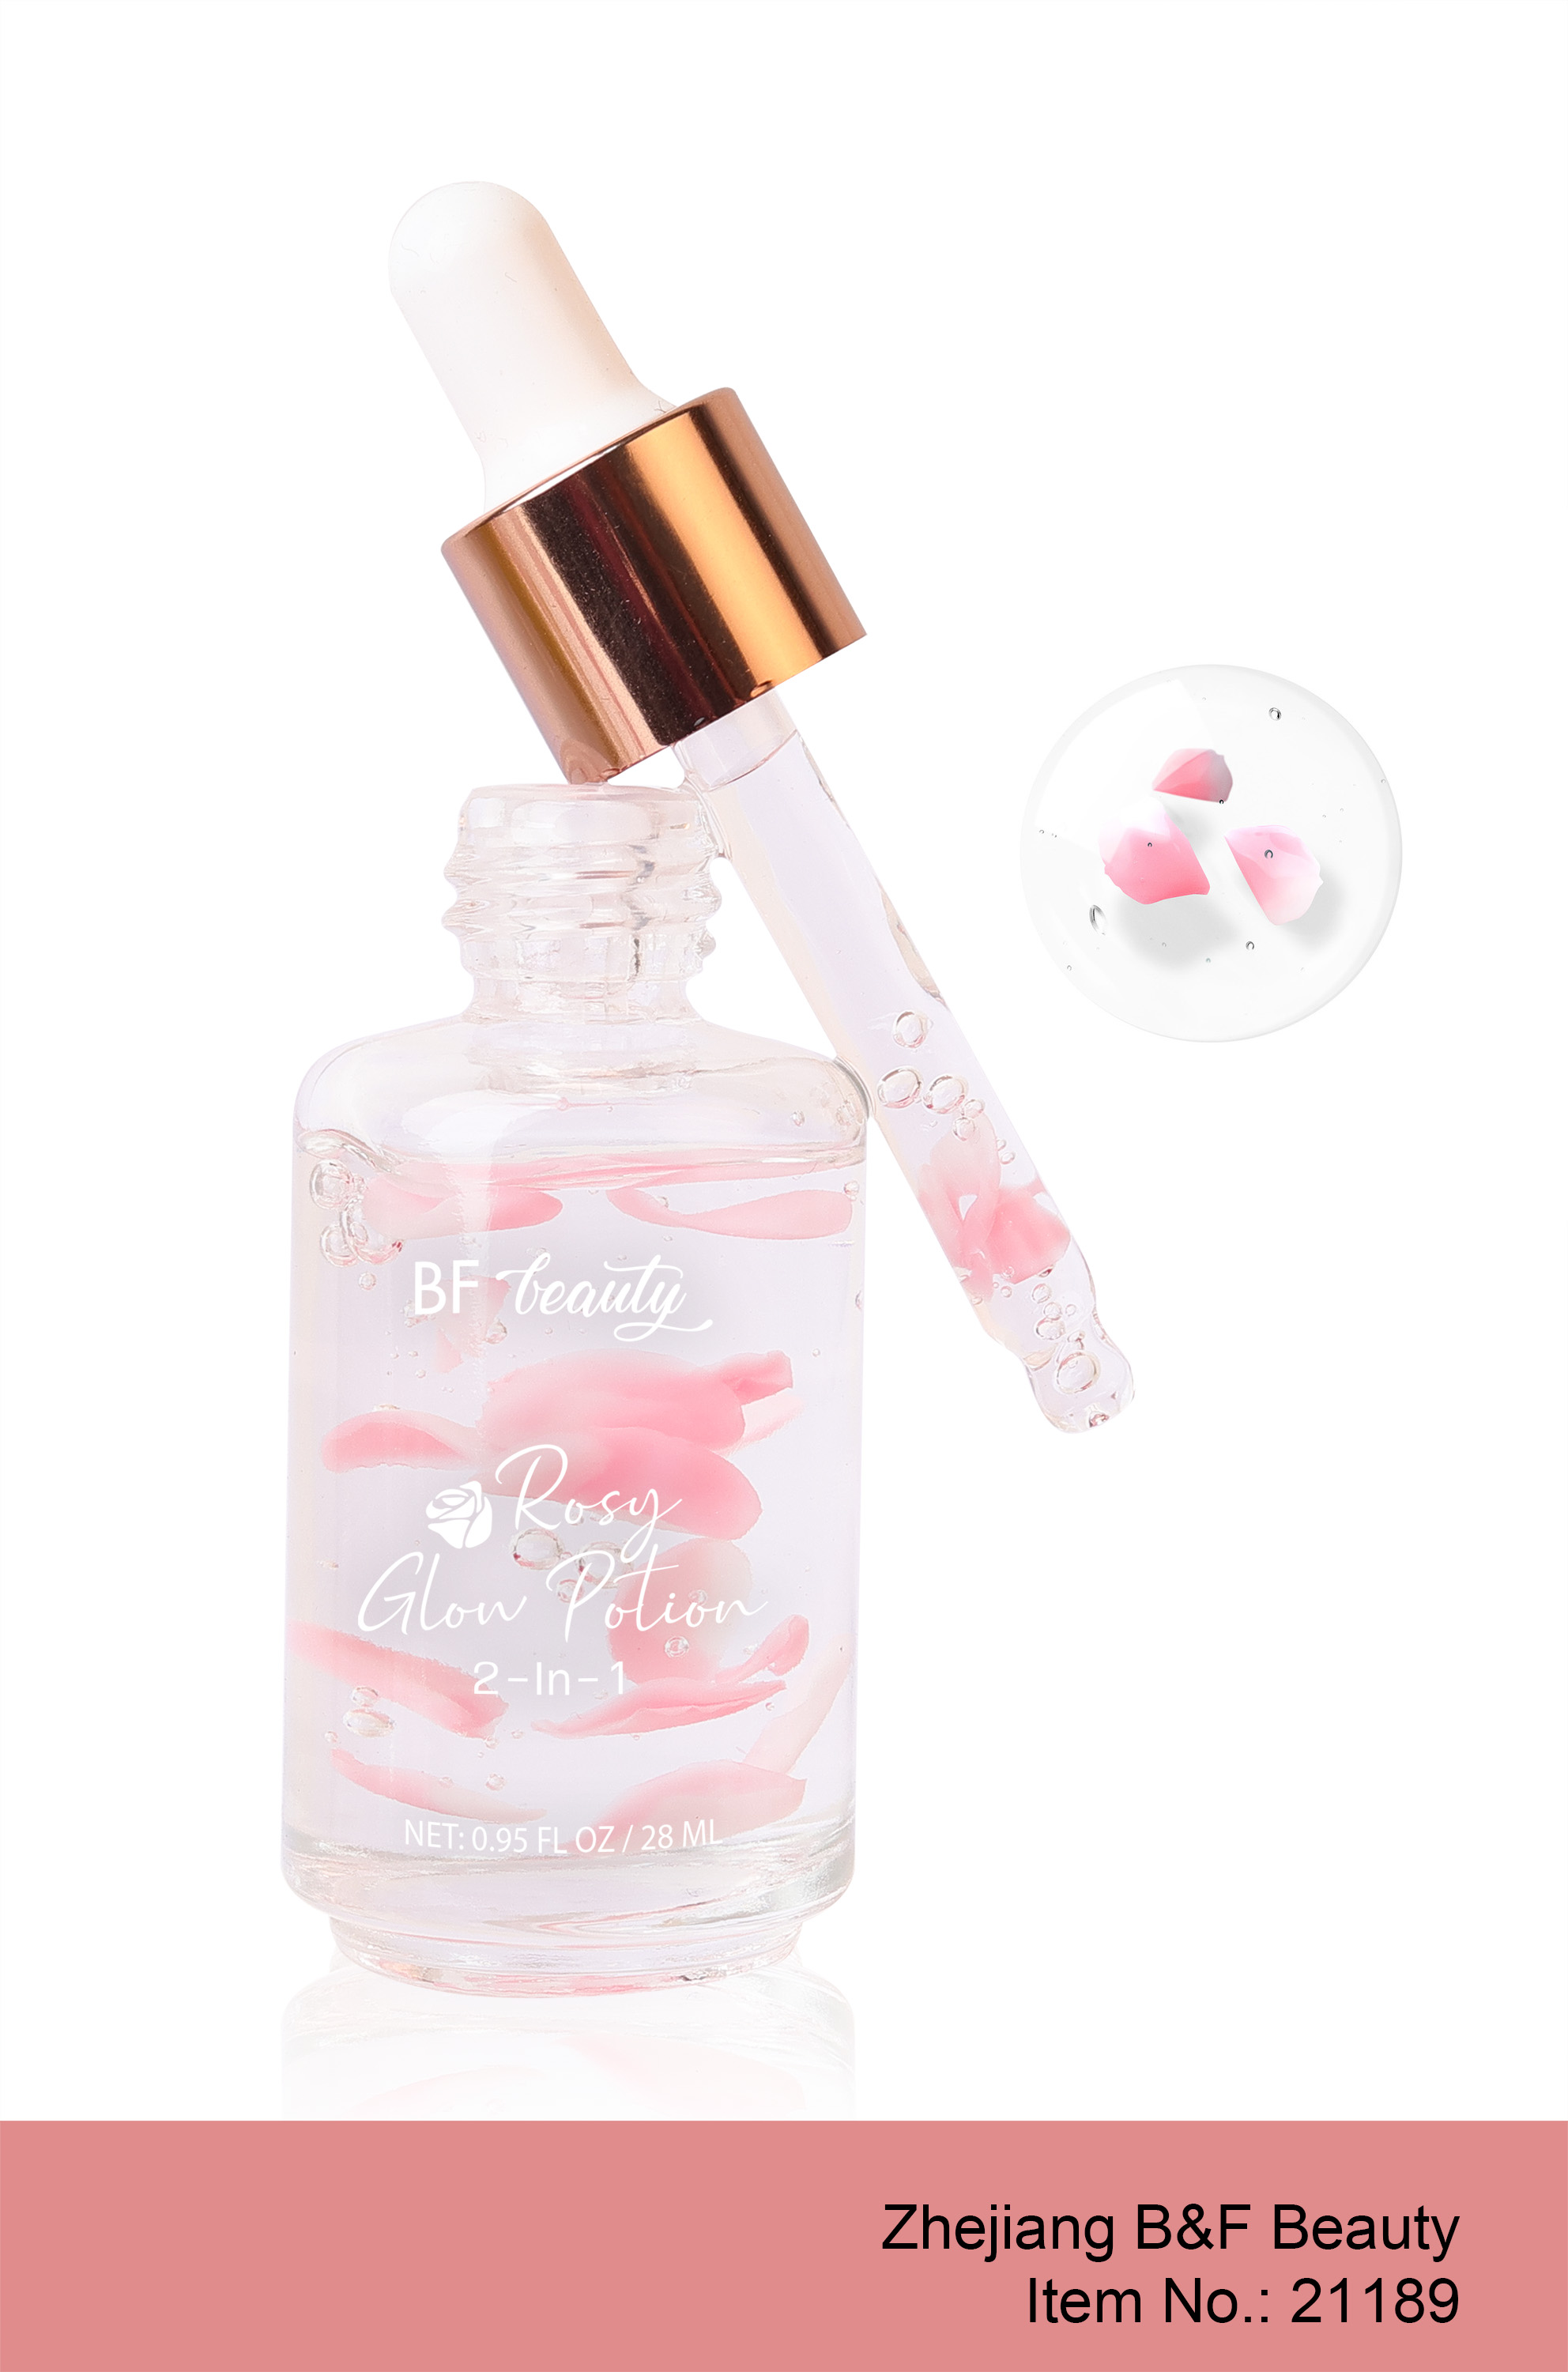 2-In-1 Rosy Glow Potion